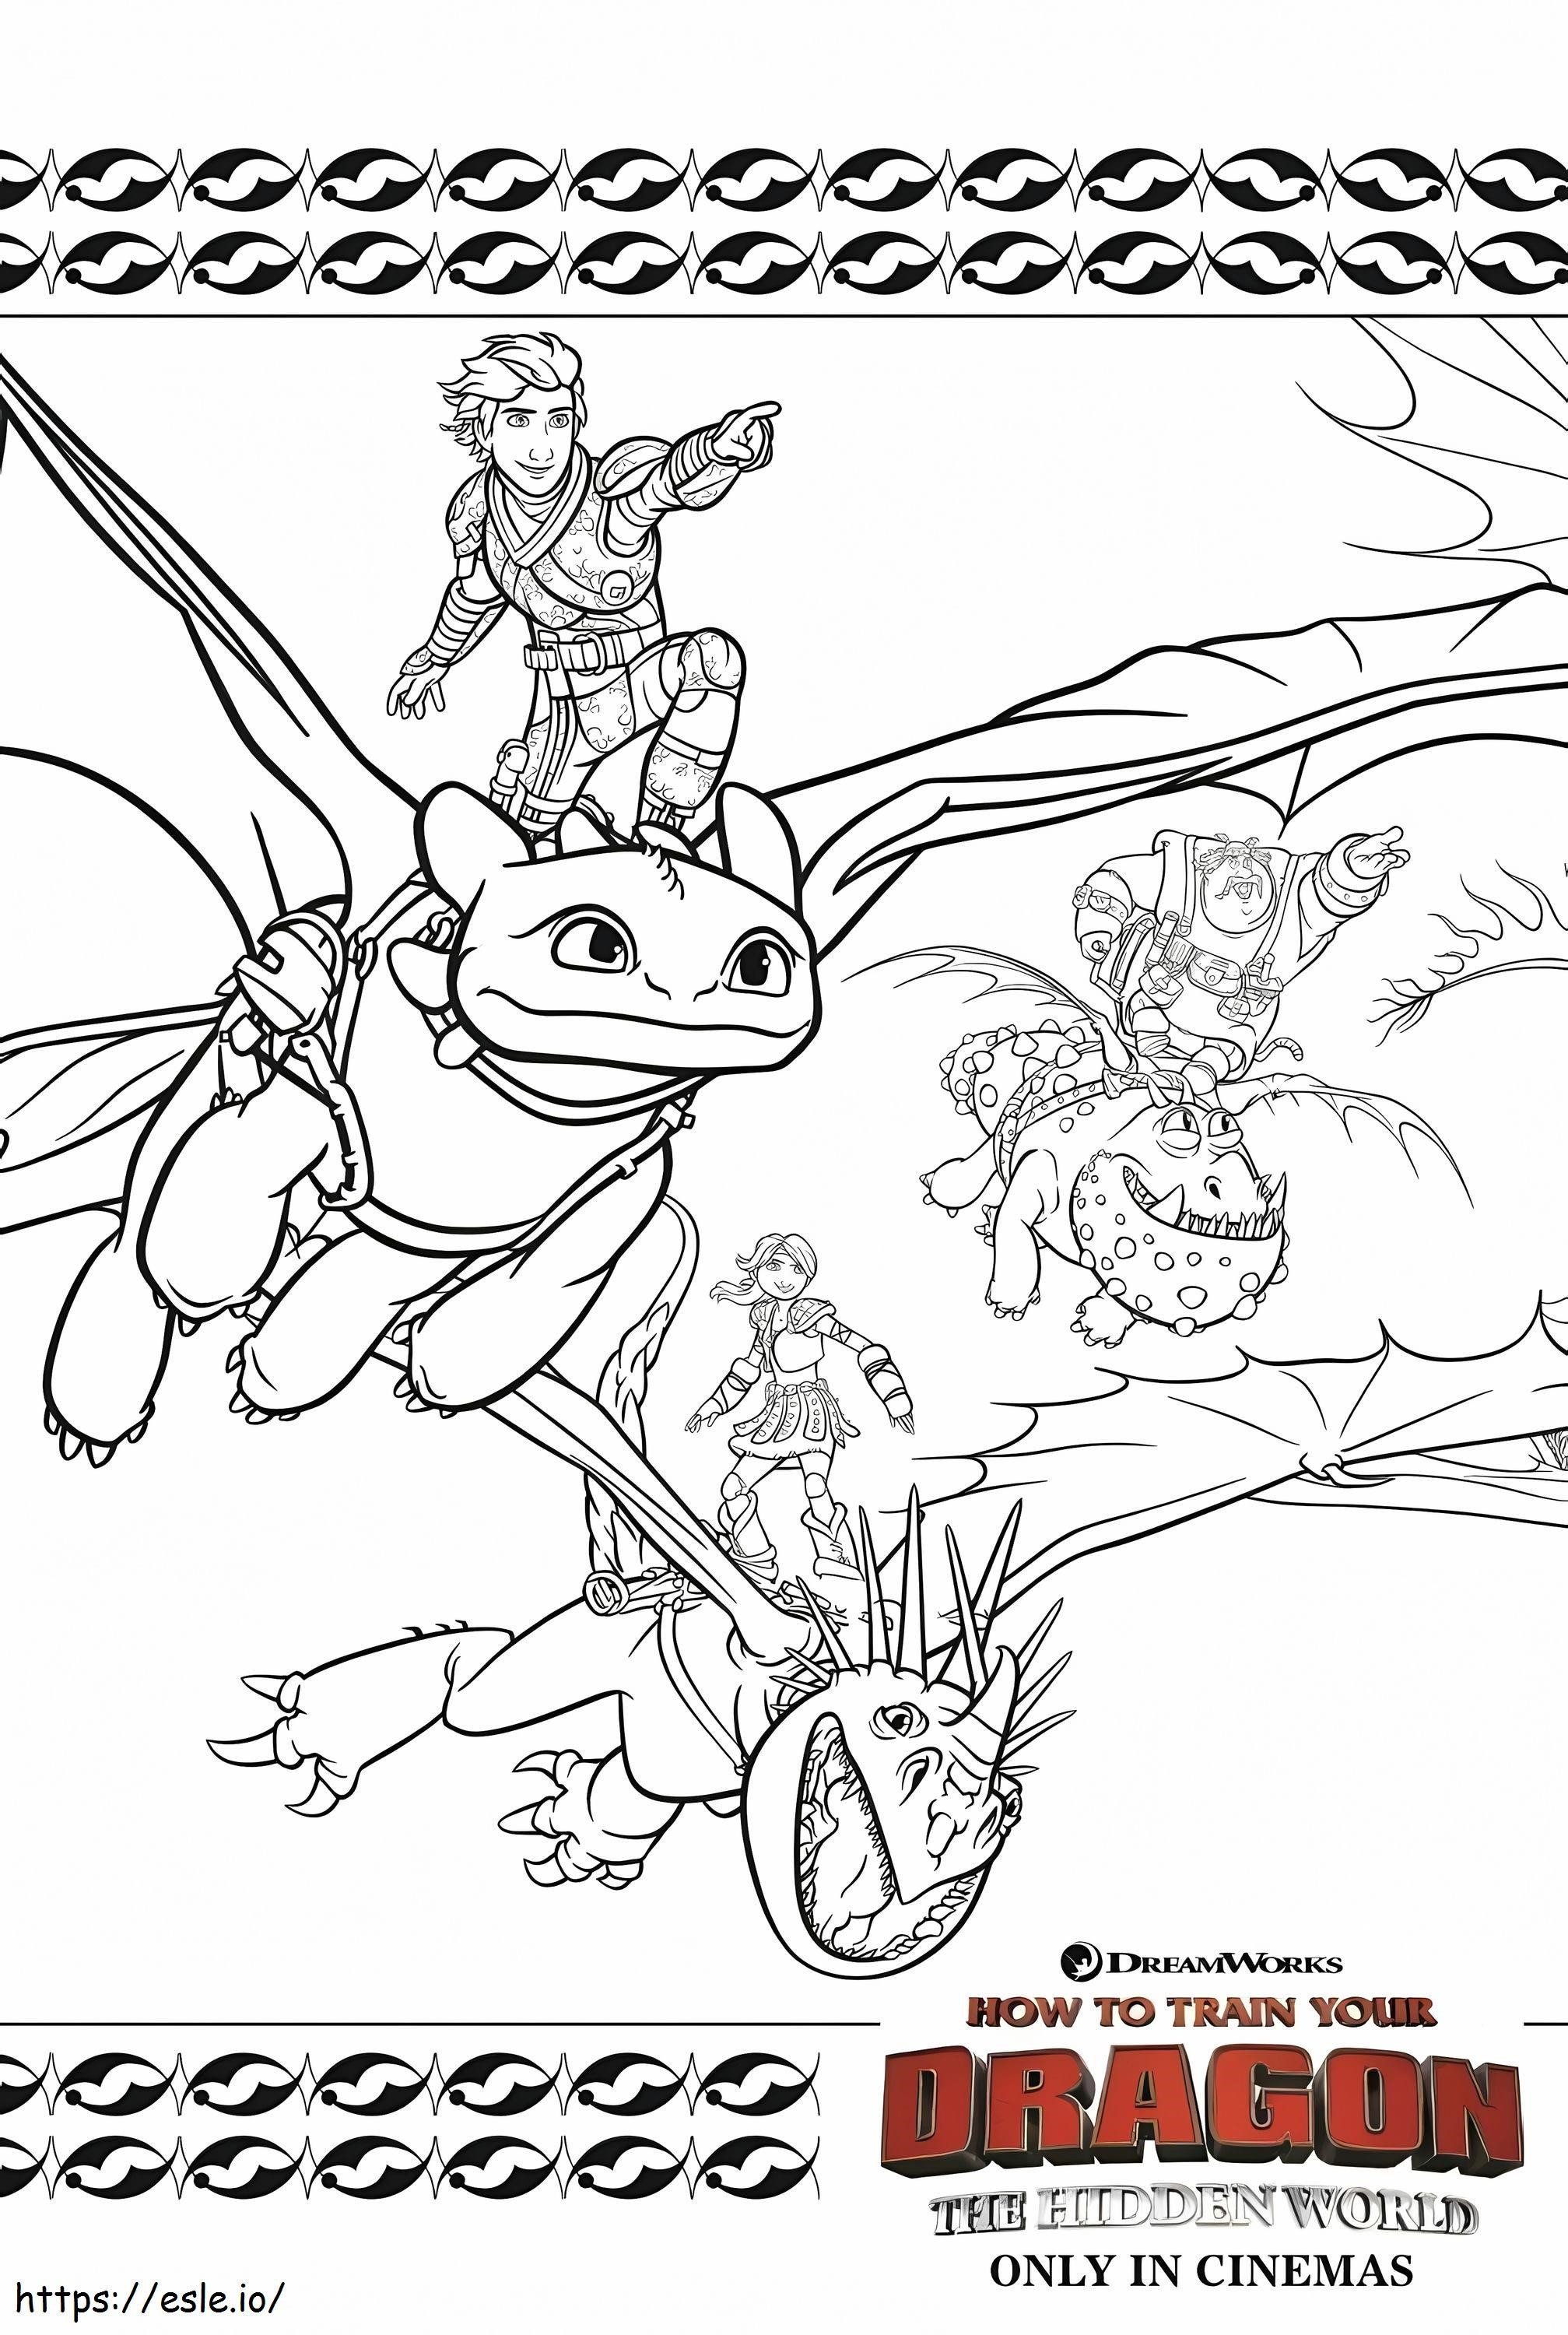 1571100995 Coloring Games For Adultsges How To Train Your Dragon Free Disney Printable Green Death Toy Wiki coloring page